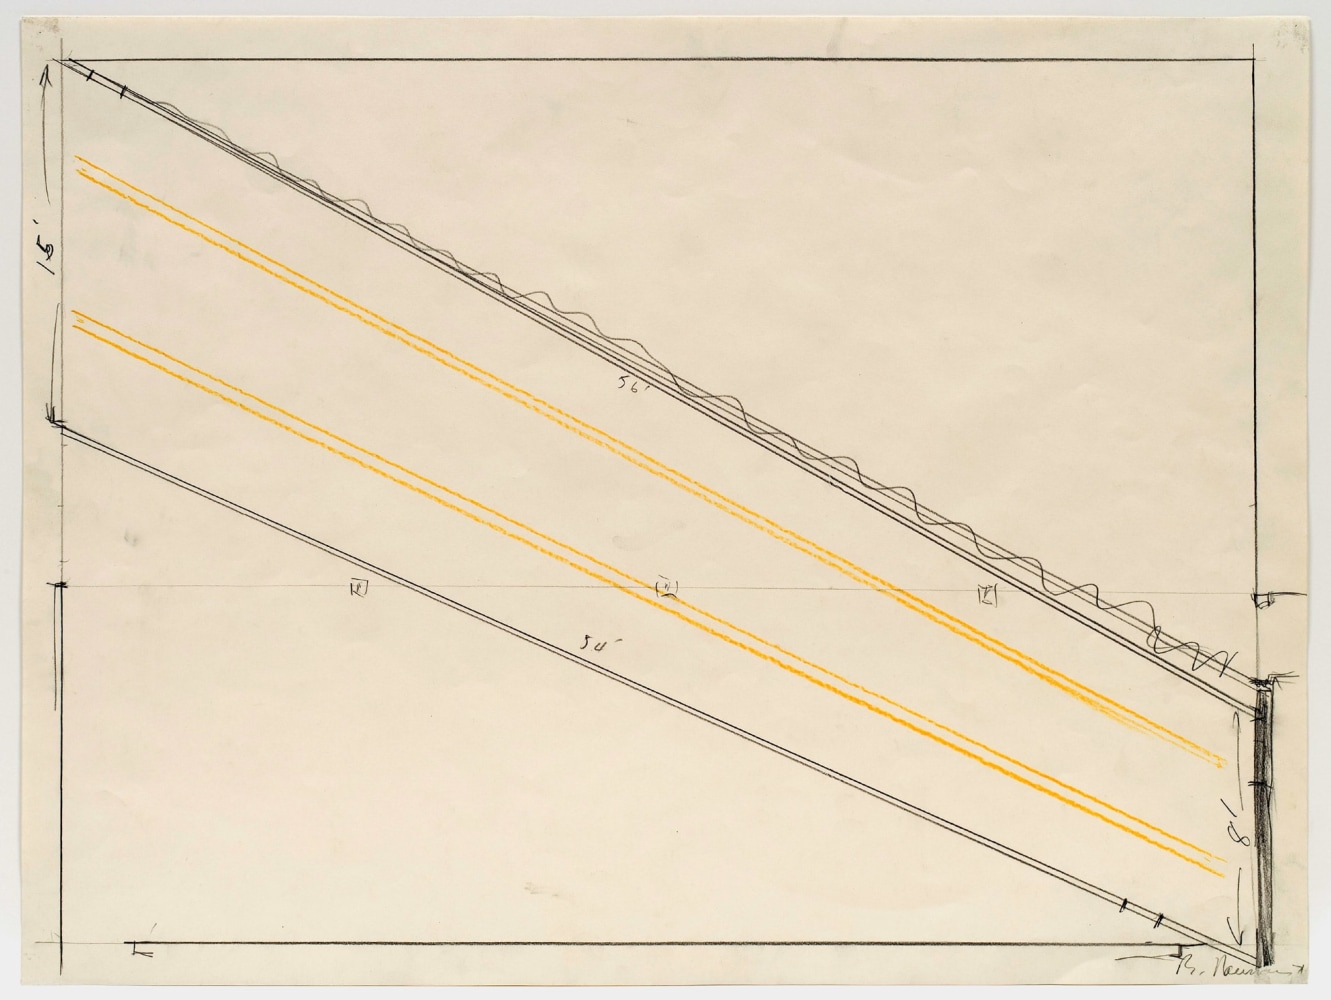 Bruce&amp;nbsp;Nauman
Untitled (Study for Installation with Yellow Lights (Castelli Installation with Yellow Lights)), 1971
graphite and colored pencil on paper
18 x 24 inches (45,7 x 61 cm)
20 5/8 x 26 5/8 inches (52,4 x 67,6 cm) frame
SW 97296